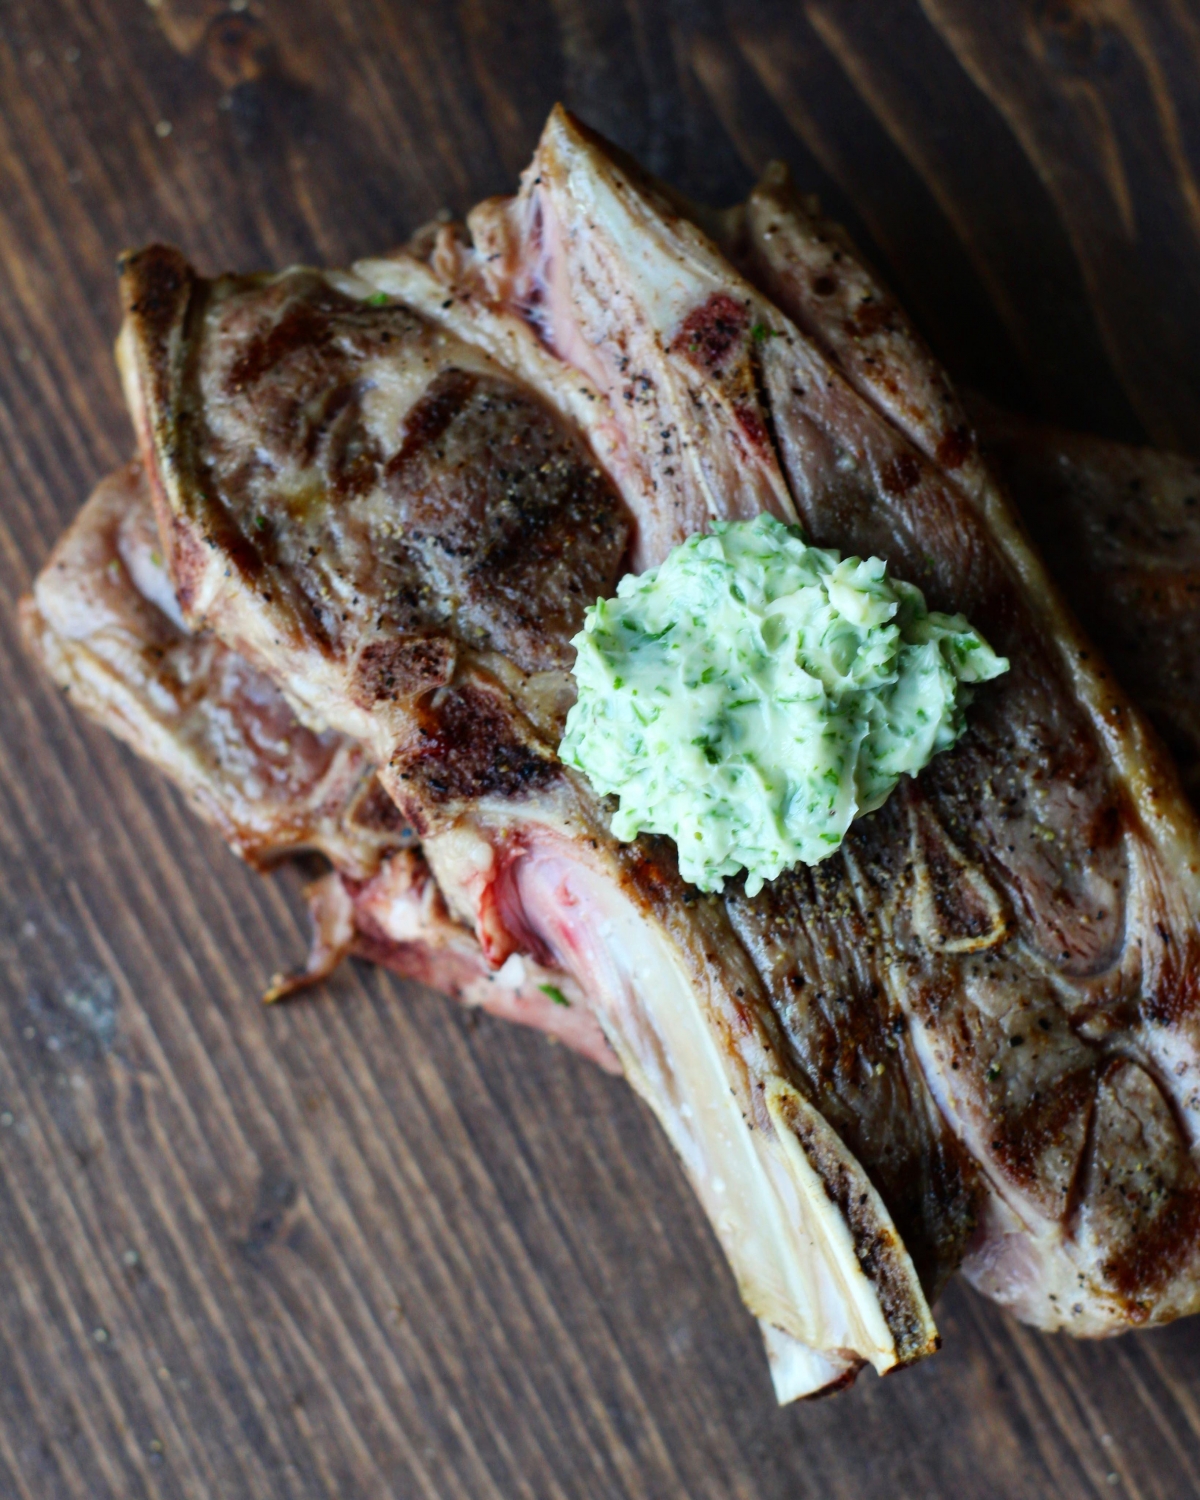 https://images.anovaculinary.com/sous-vide-lamb-chops-with-chimichurri-compound-butter/header/sous-vide-lamb-chops-with-chimichurri-compound-butter-header-og.jpg